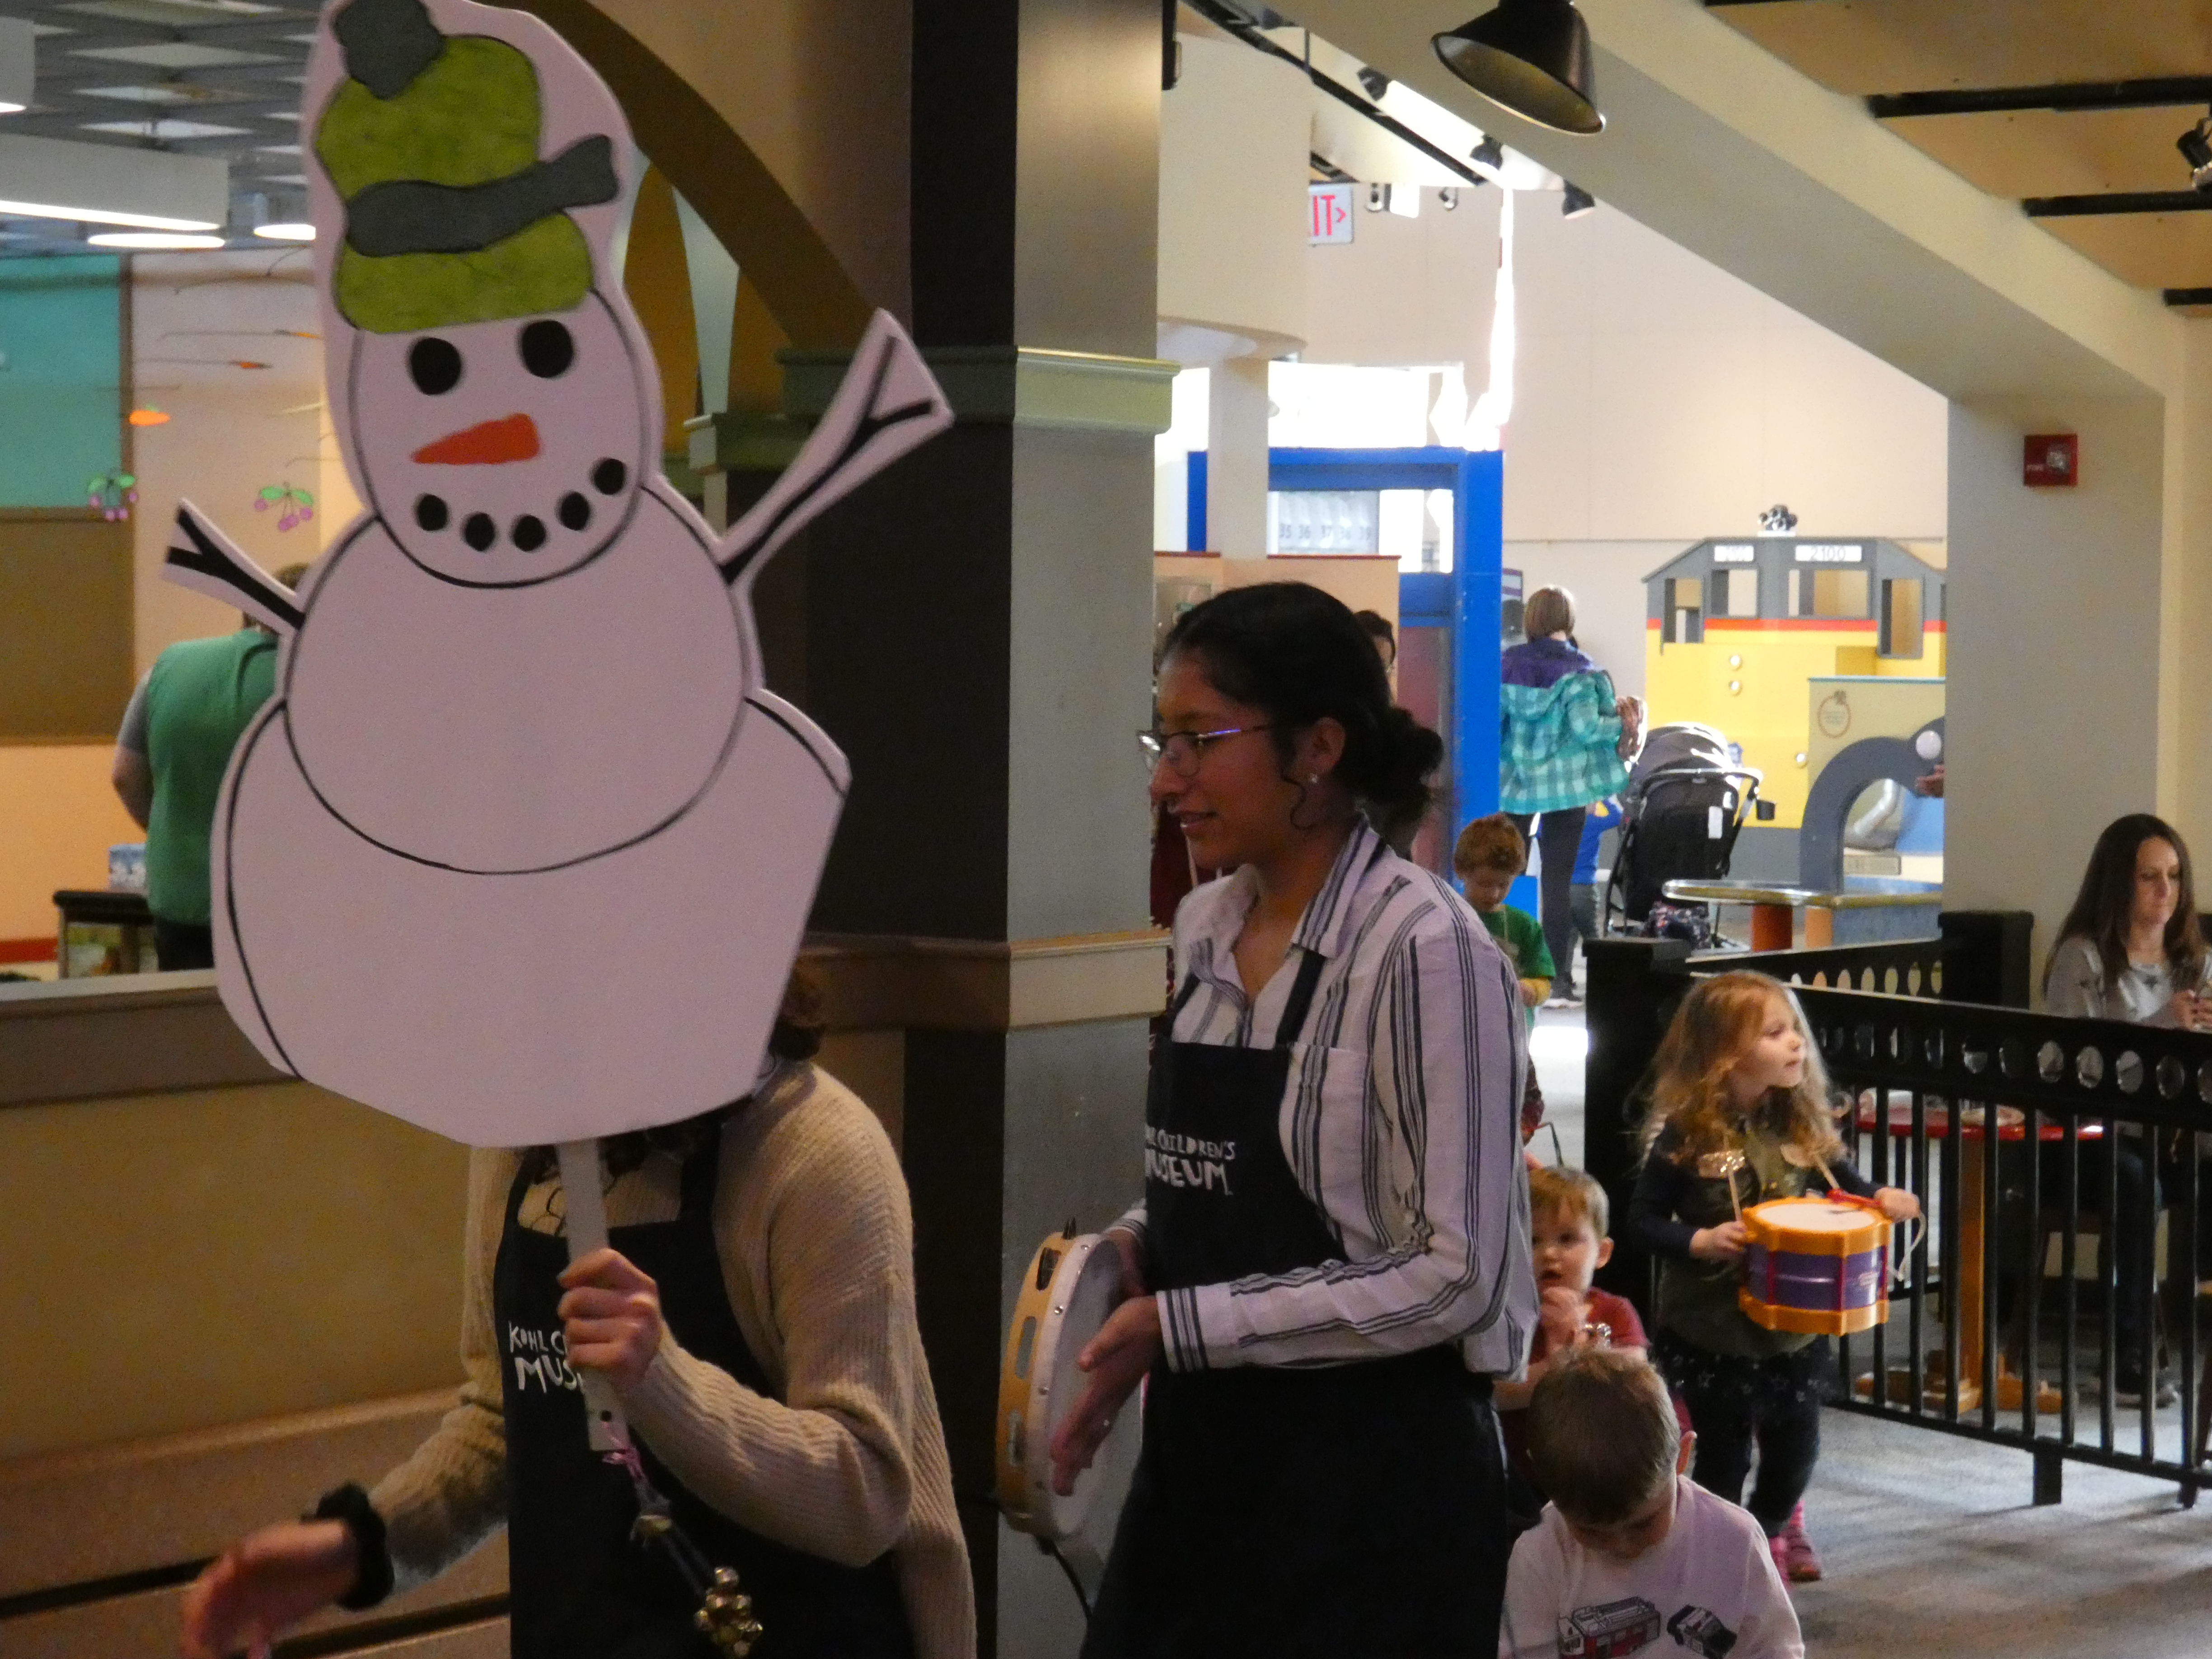 Flurry Days Snow People Parade and activities - Kohl Children's Museum